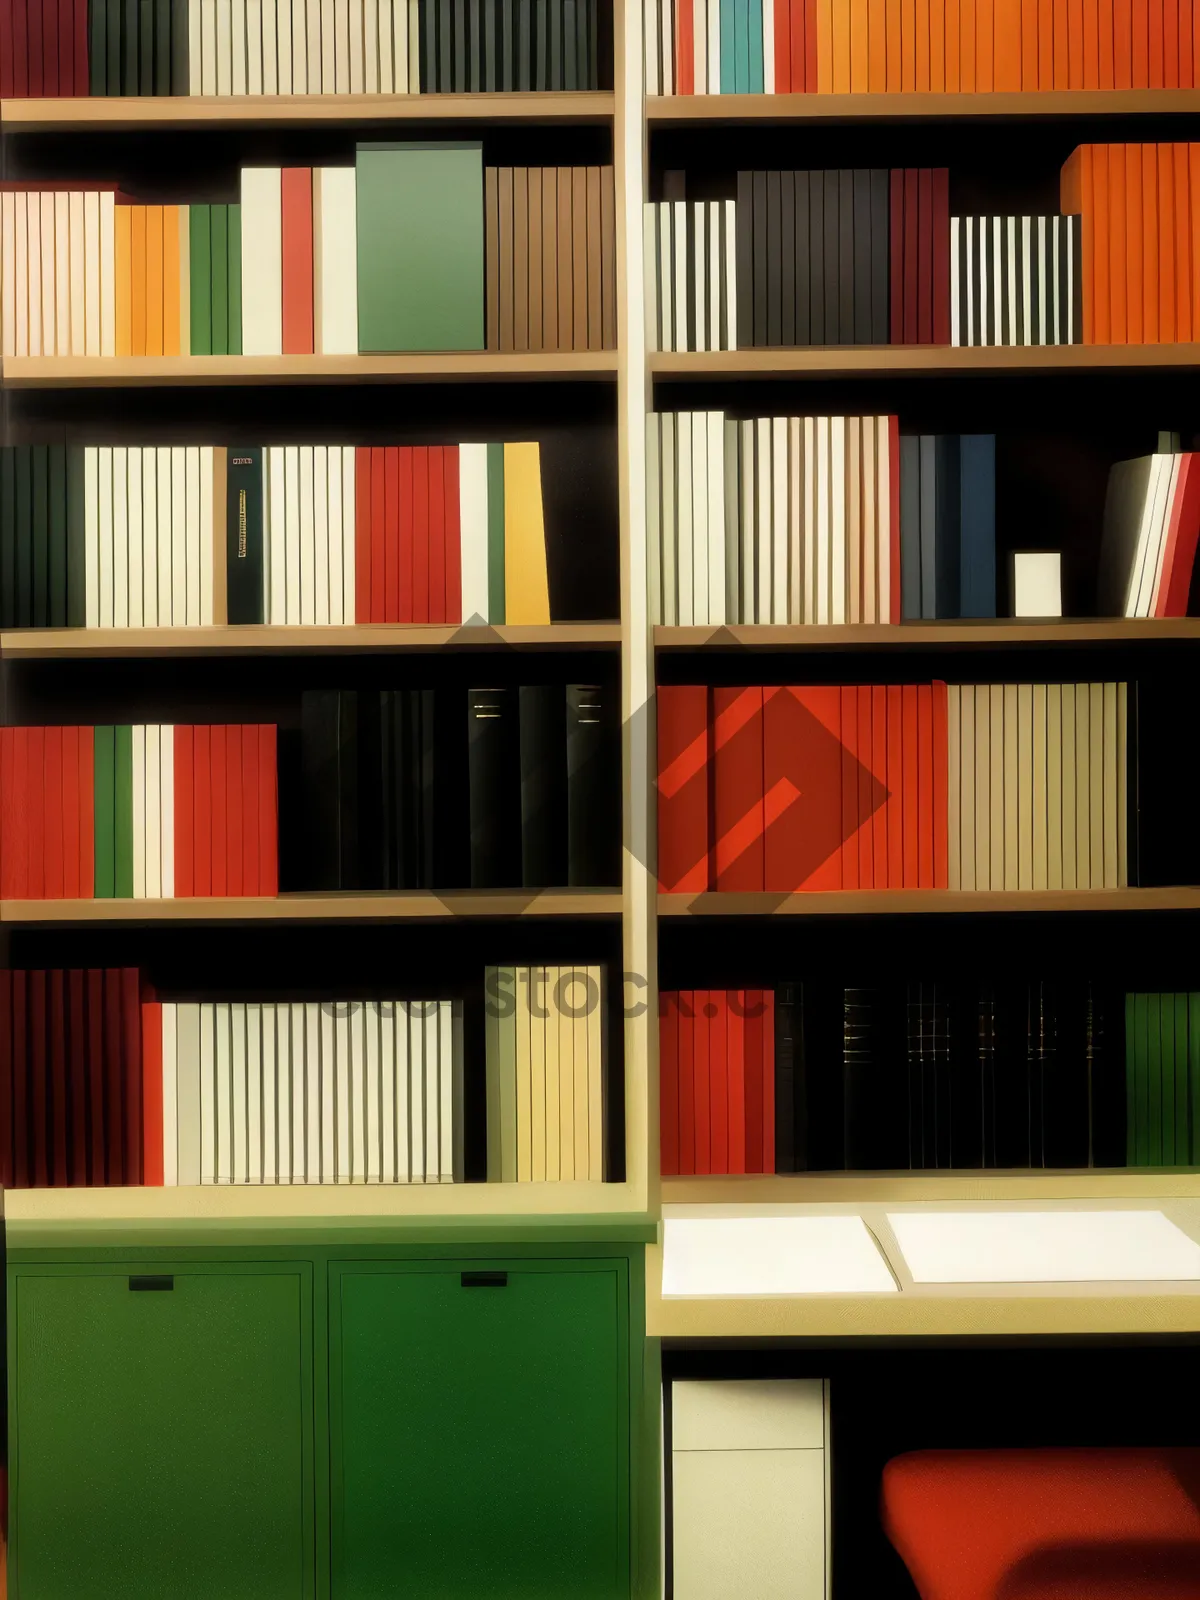 Picture of Colorful Bookshelf in a Library